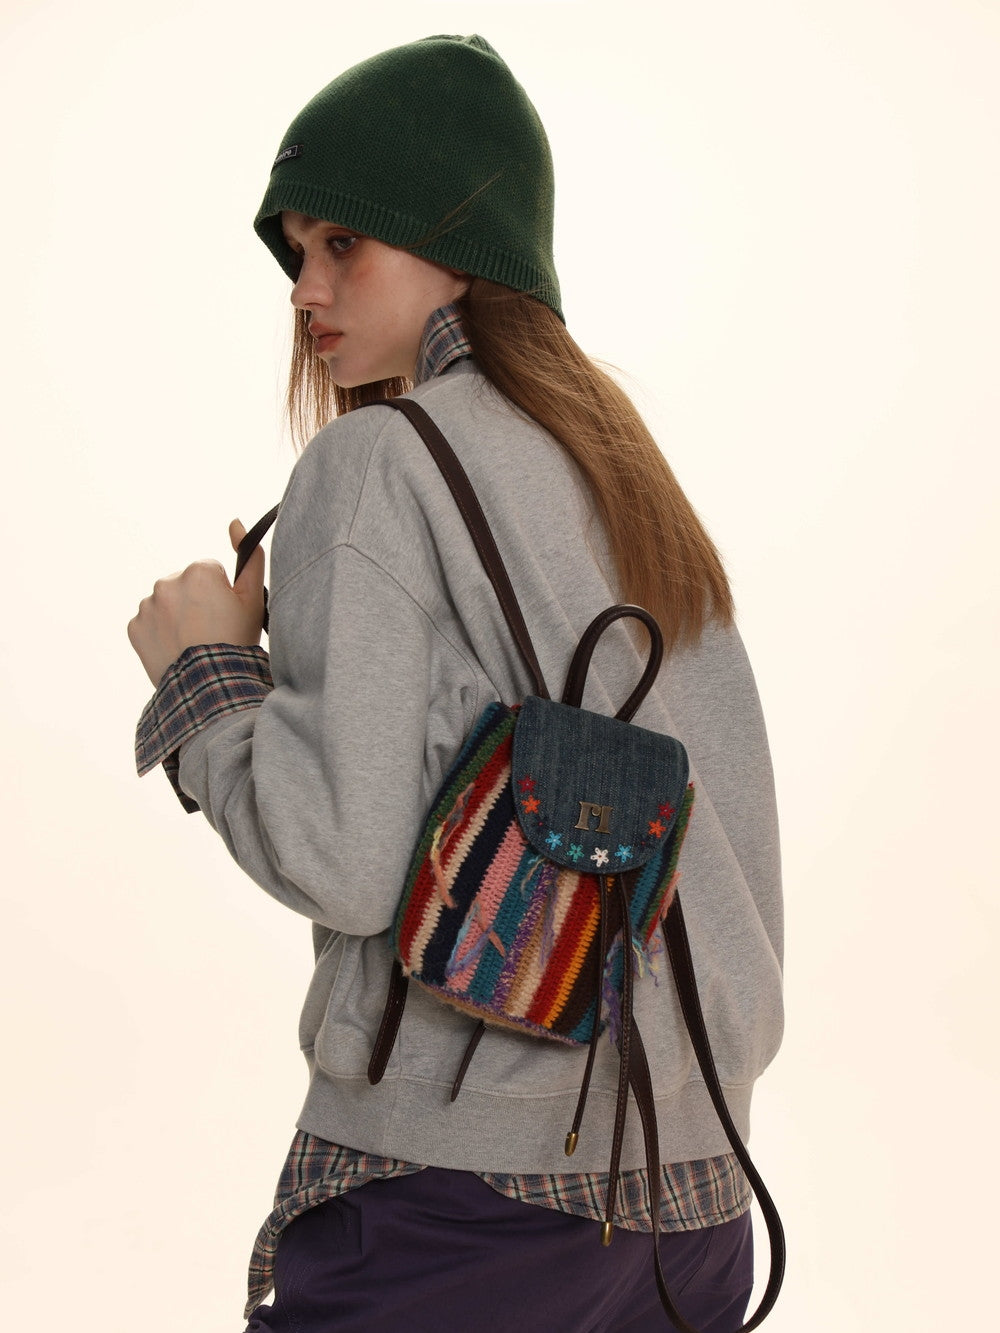 Floral Embroidered Knit Backpack With Protective Flap - chiclara